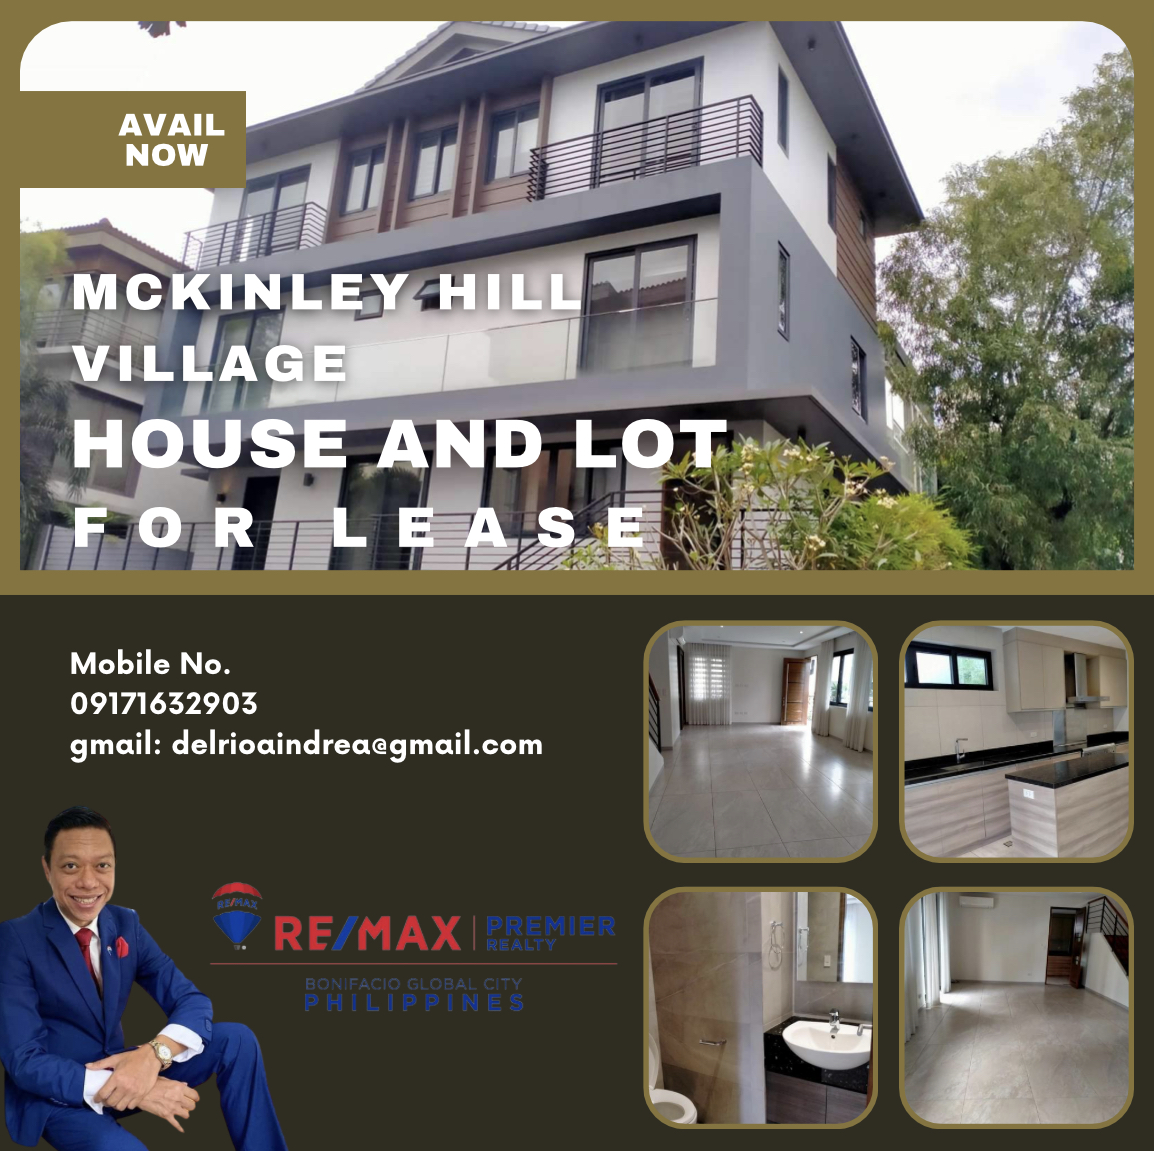 Mckinley Hill Village House and Lot for Lease‼️